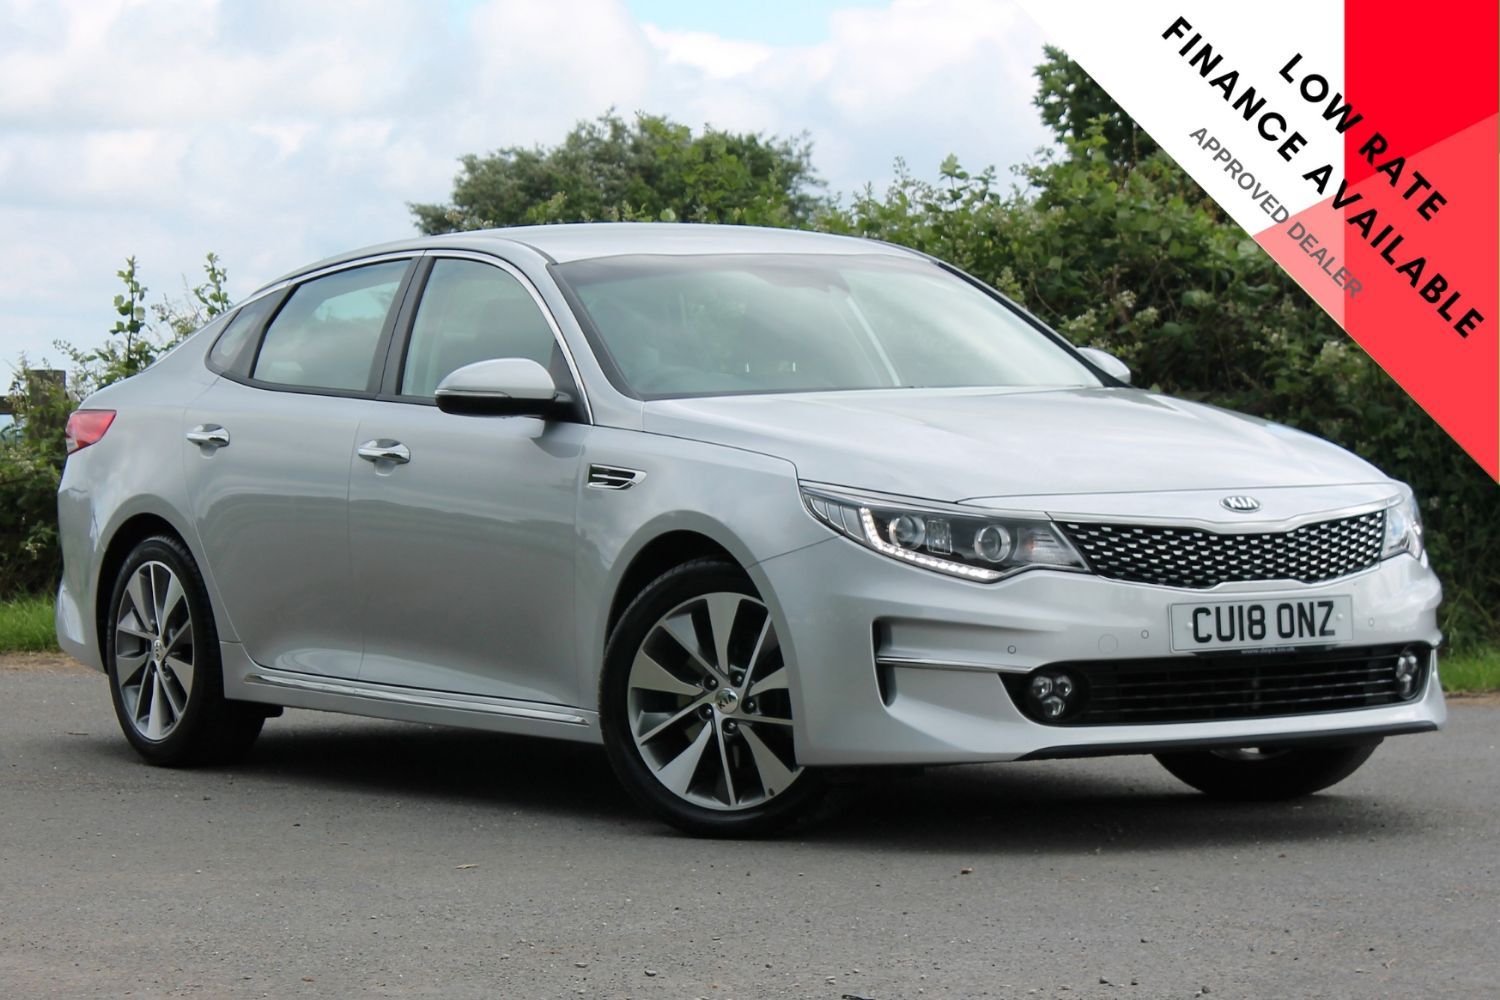 Used KIA OPTIMA in Ashby dela Zouch, Leicestershire